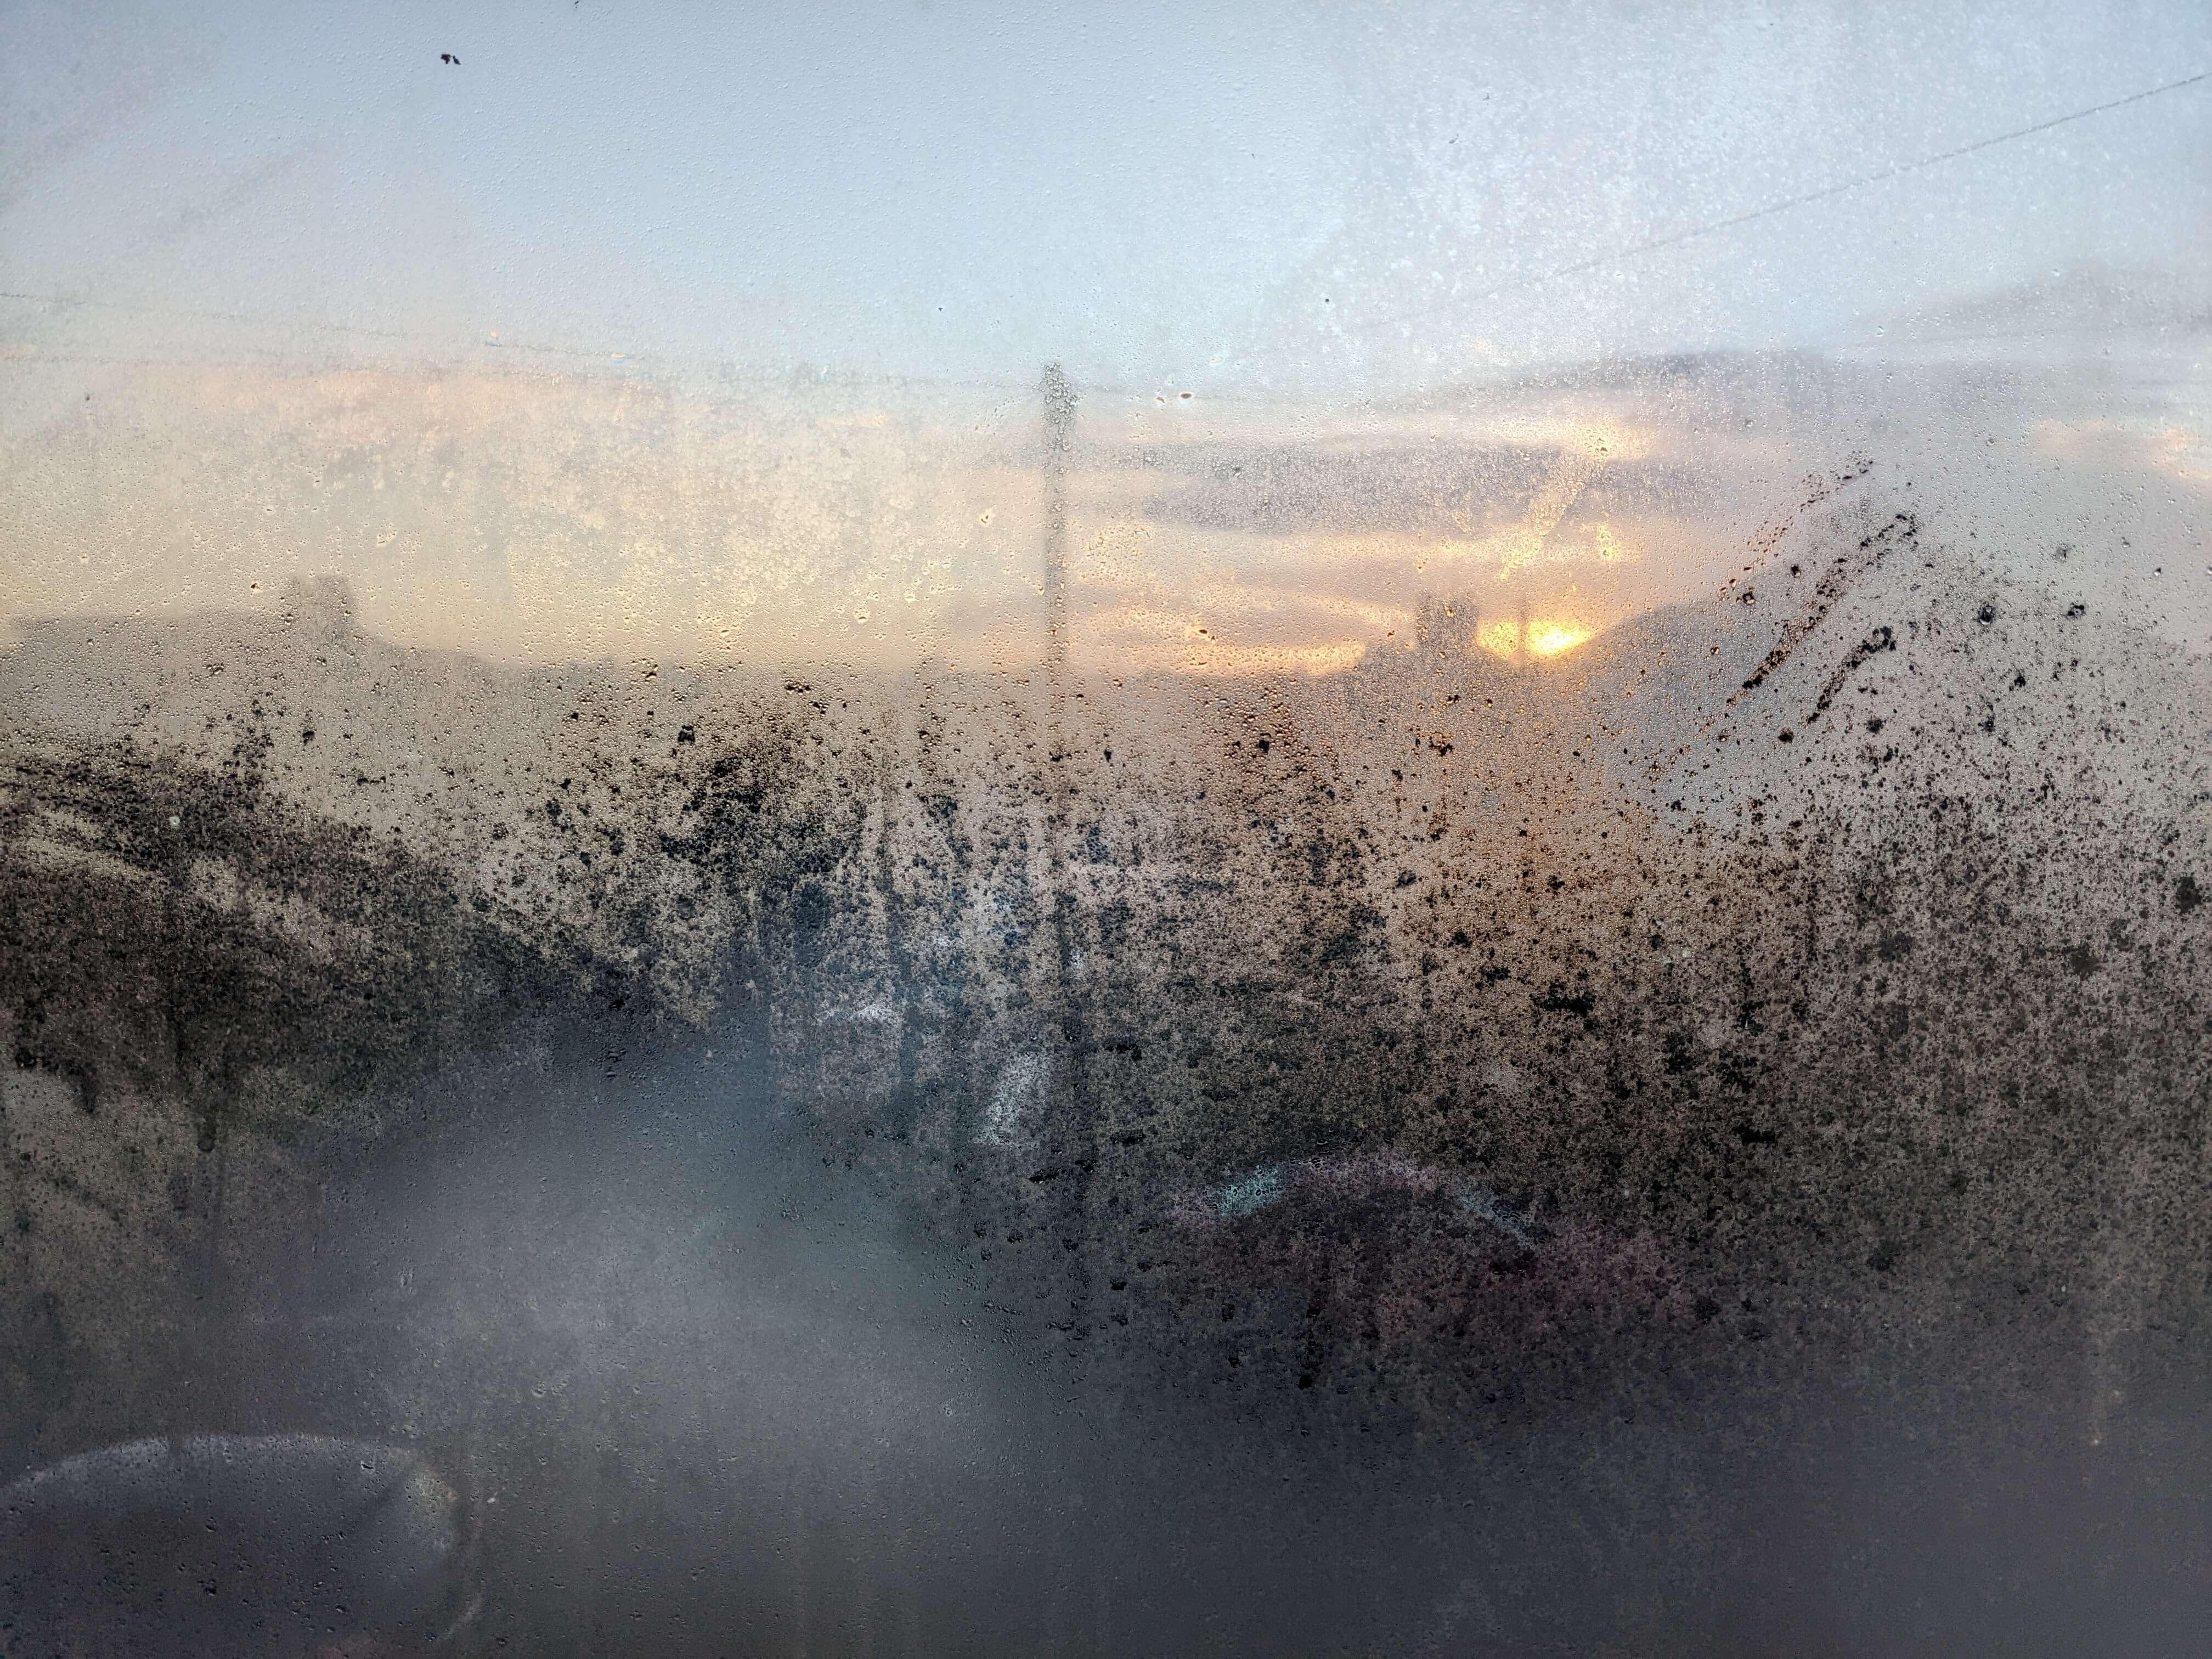 Window condensation: 'Spray entire surface' with common item to